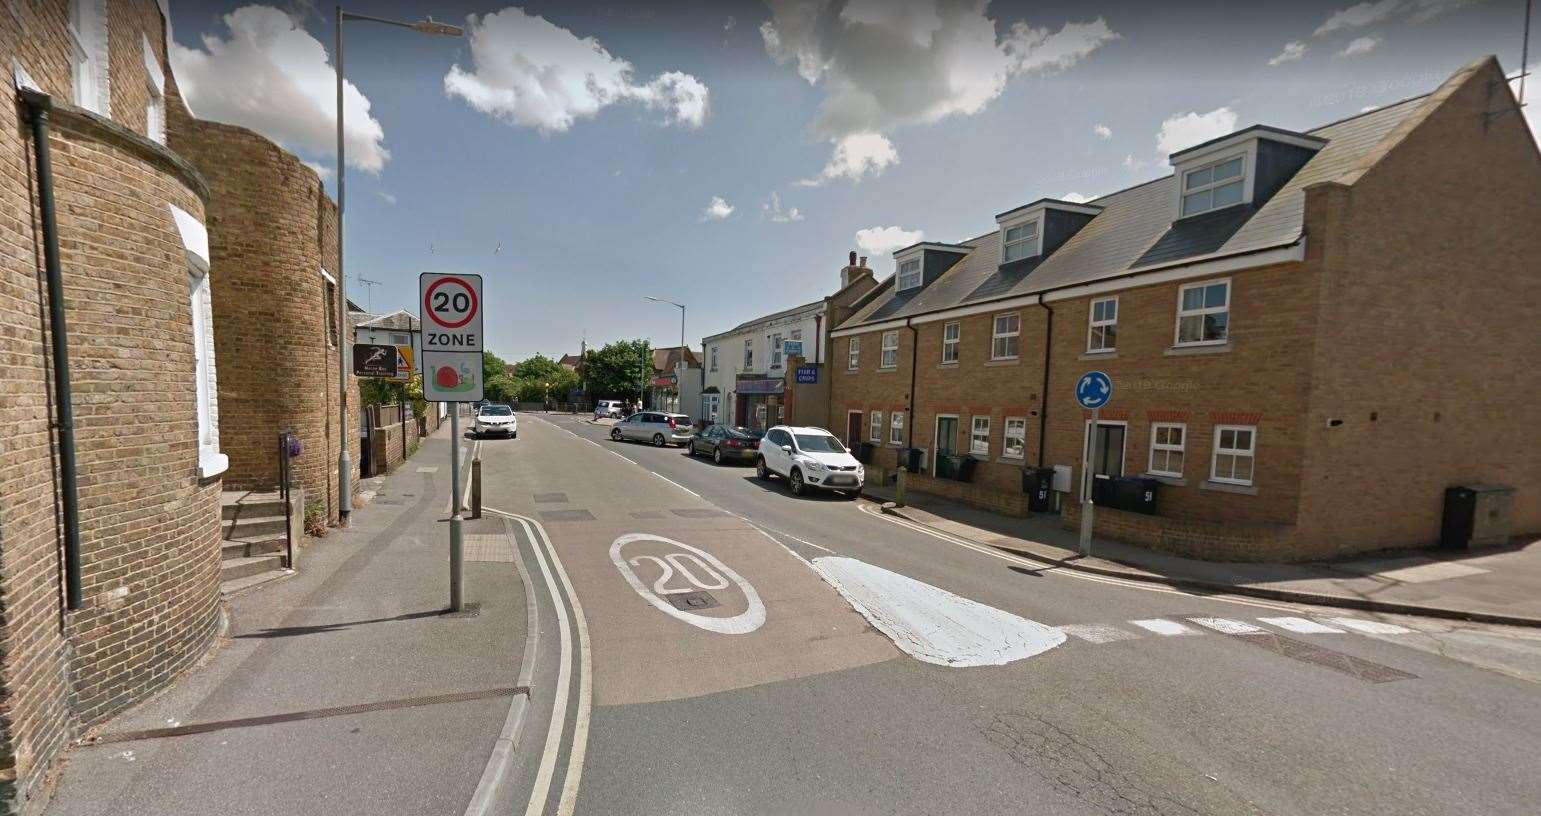 The incident took place at a business in King's Road, Herne Bay. Picture: Google